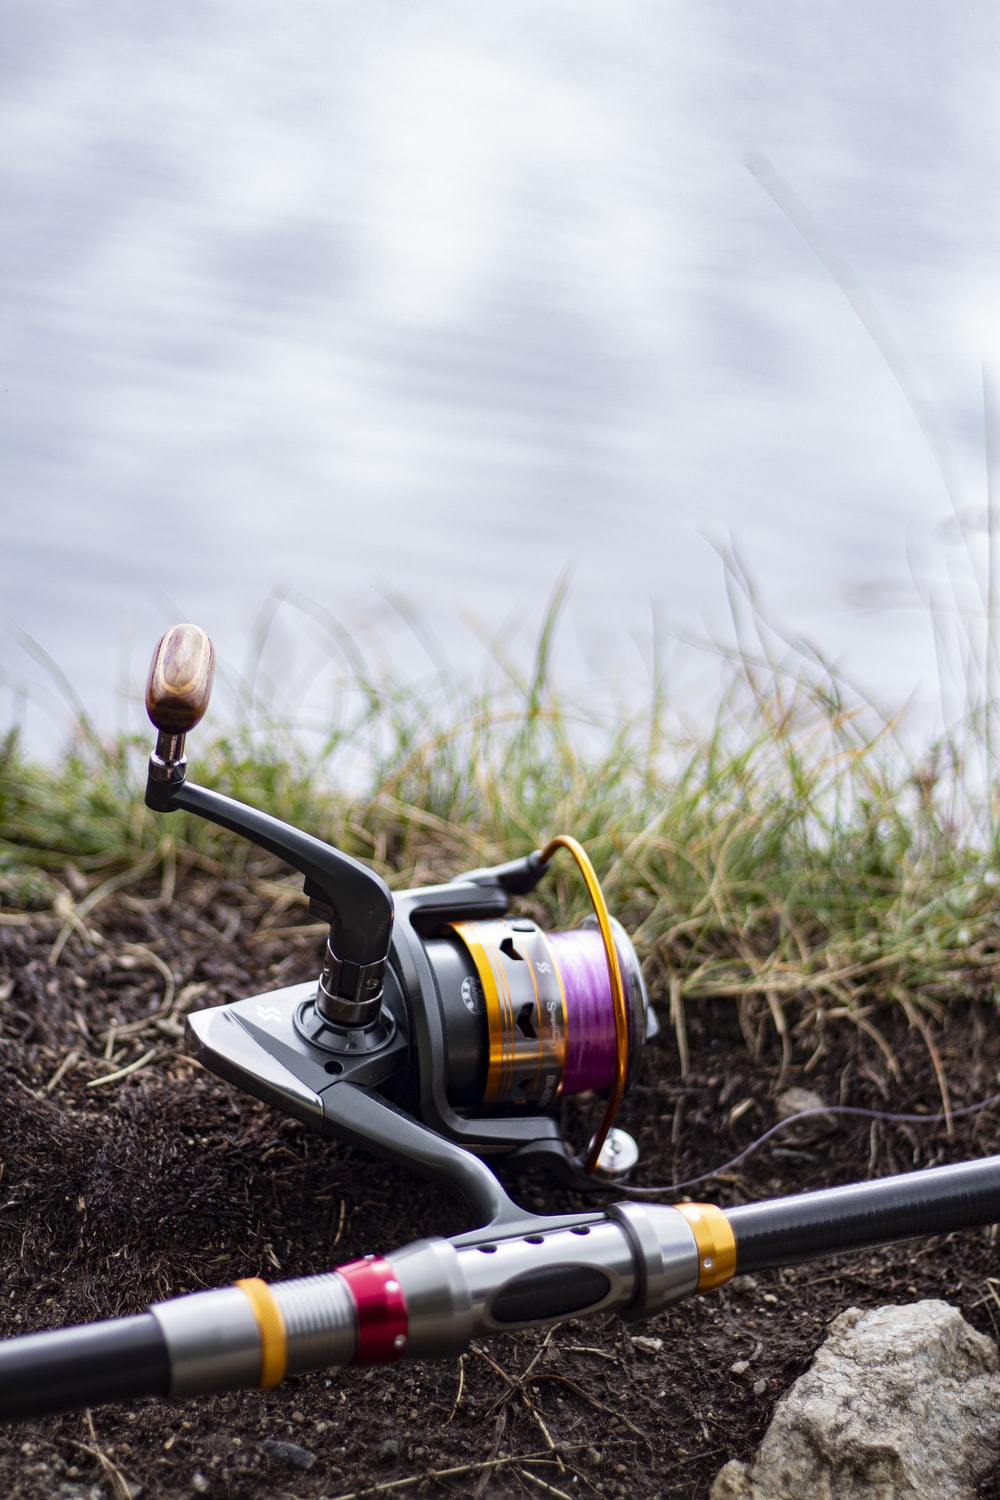 Fishing Reel Picture. Download Free Image